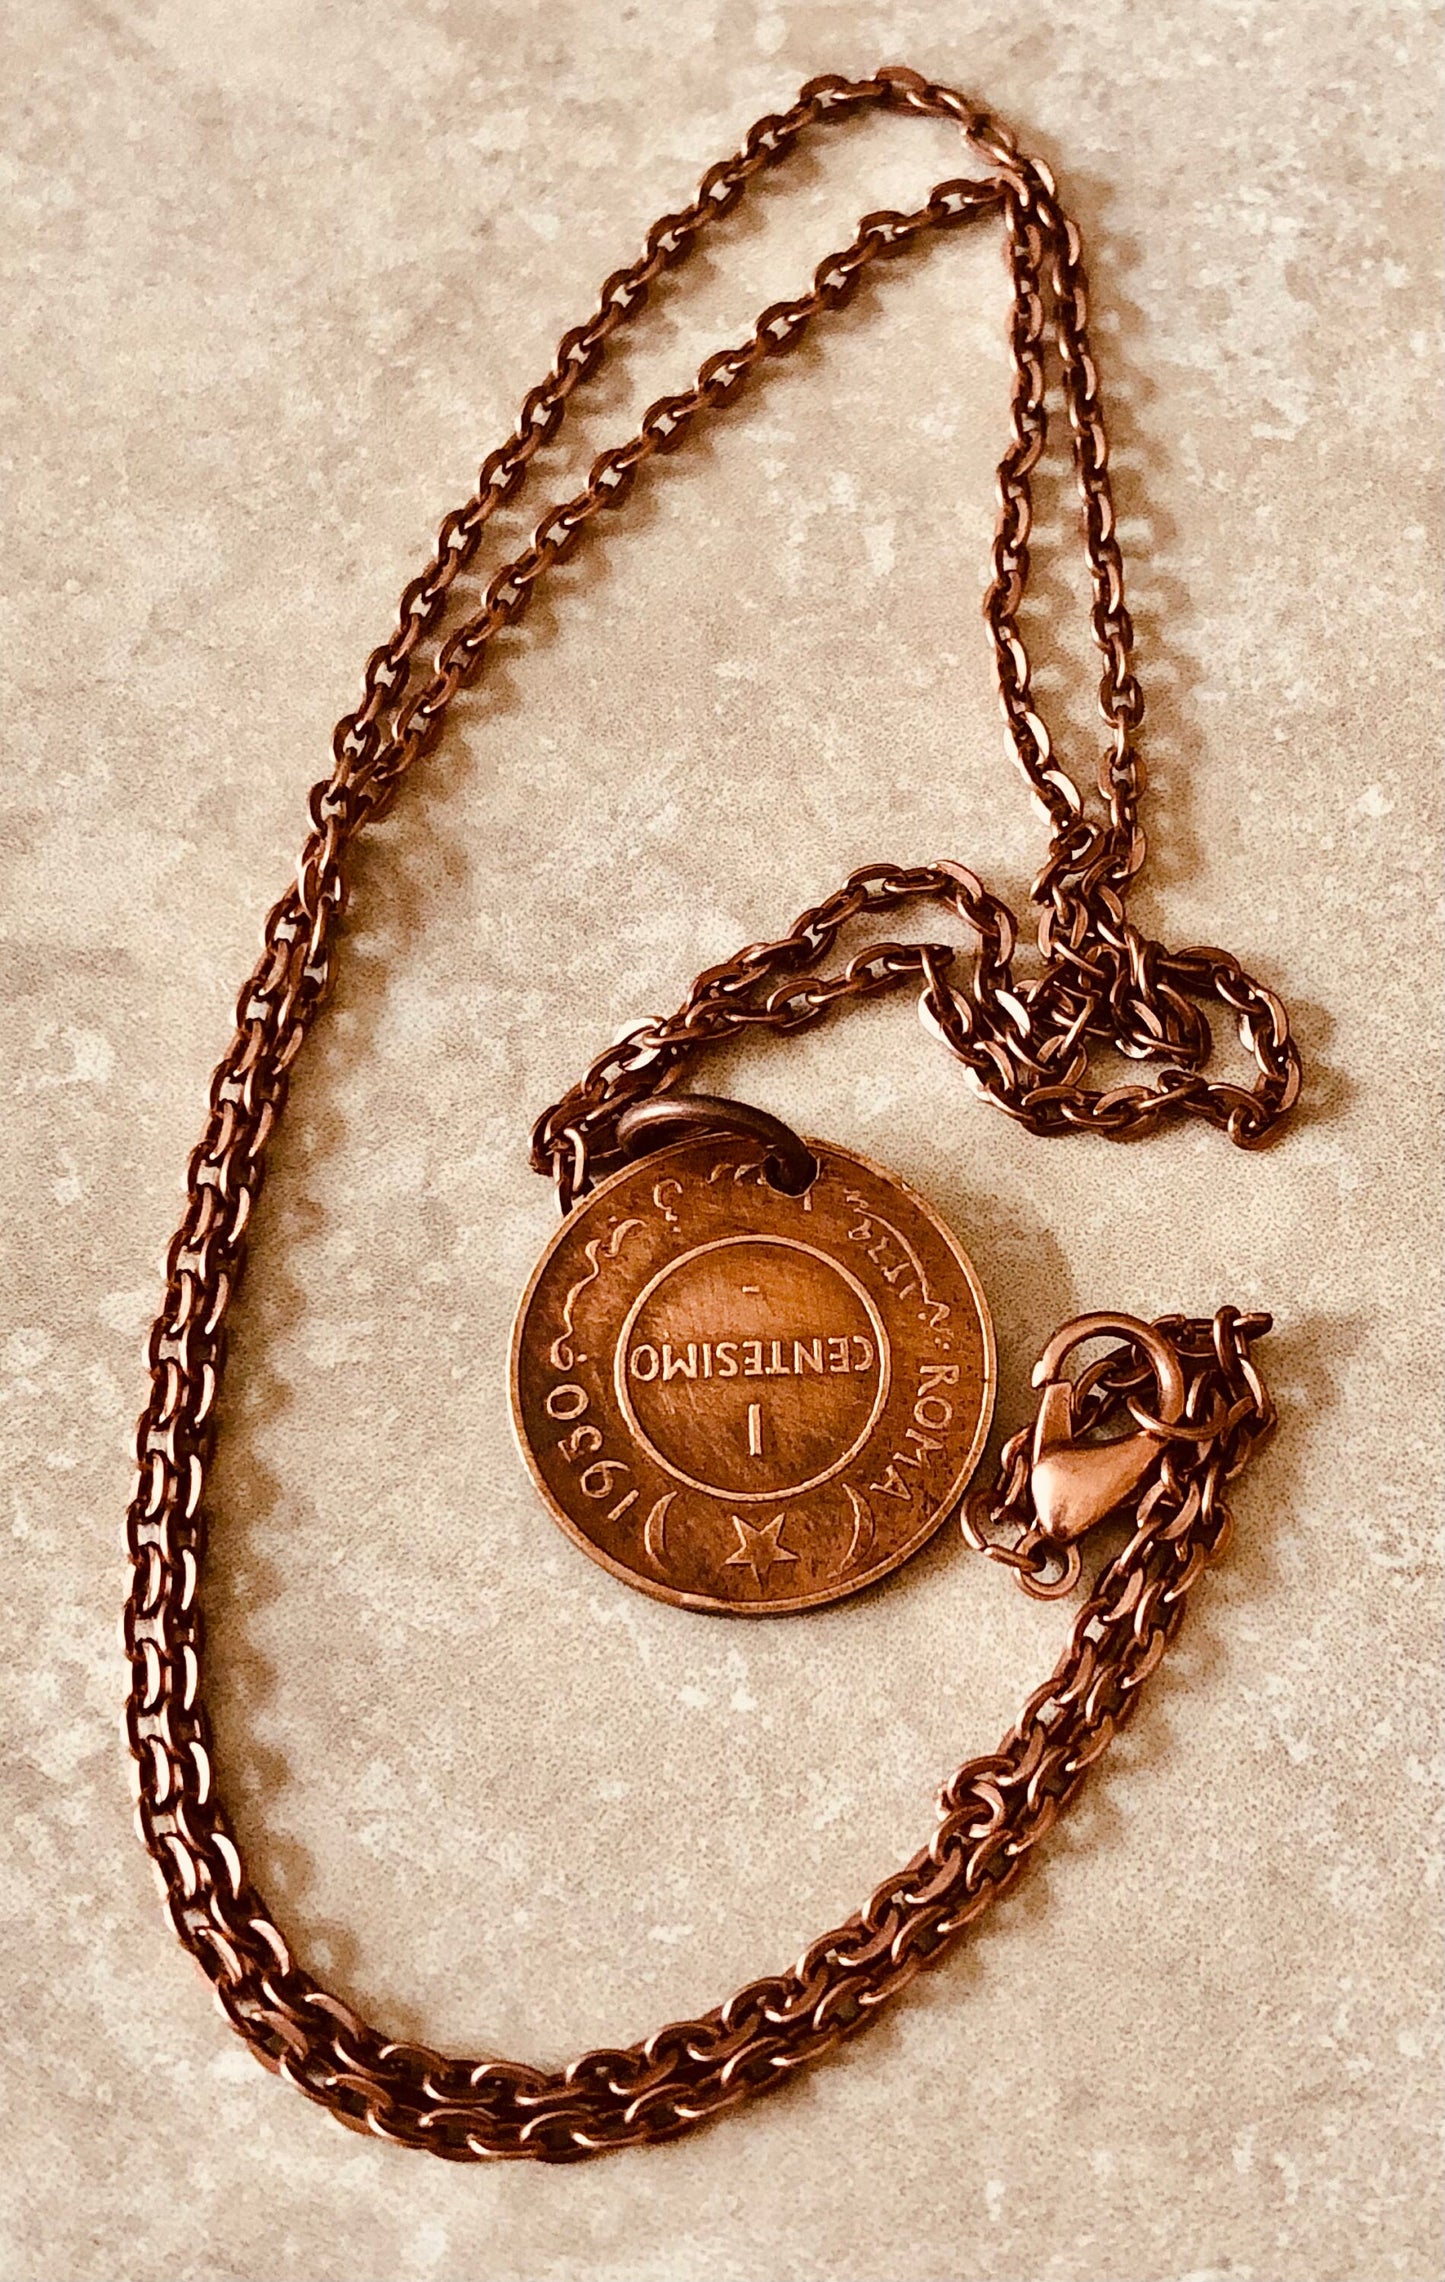 Somalia Coin Necklace Somalia 1 Centesimo Pendant Personal Old Vintage Handmade Jewelry Gift Friend Charm For Him Her World Coin Collector